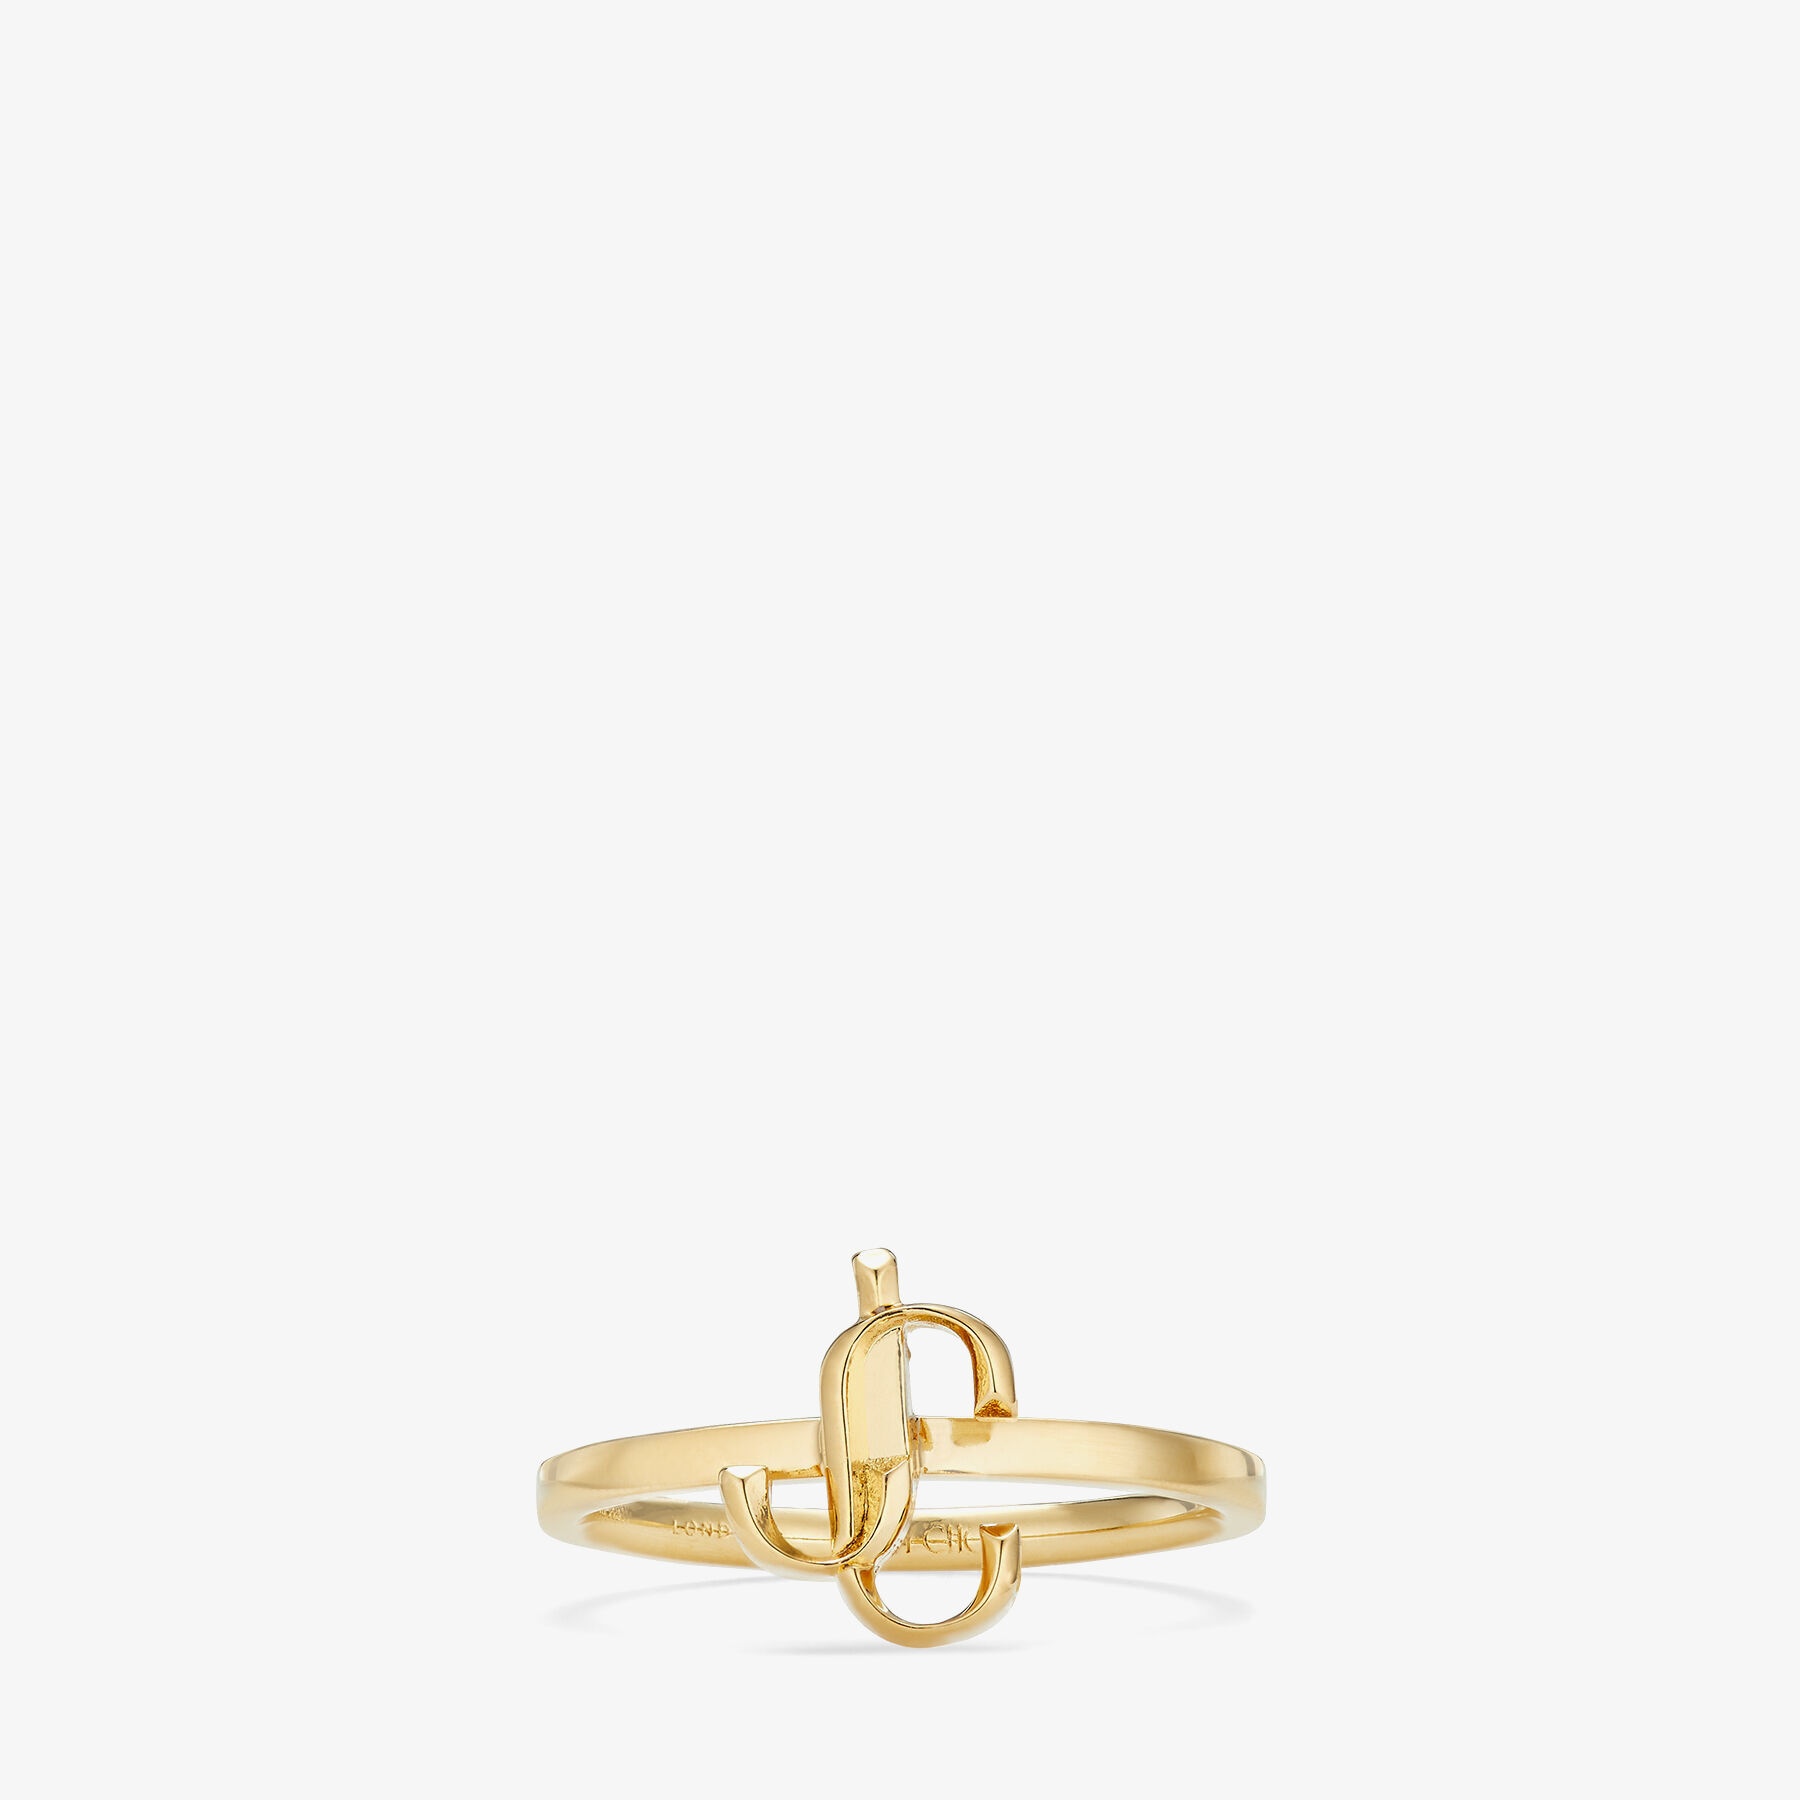 JIMMY CHOO JC Ring Gold-Finish Metal Ring with JC Initials 